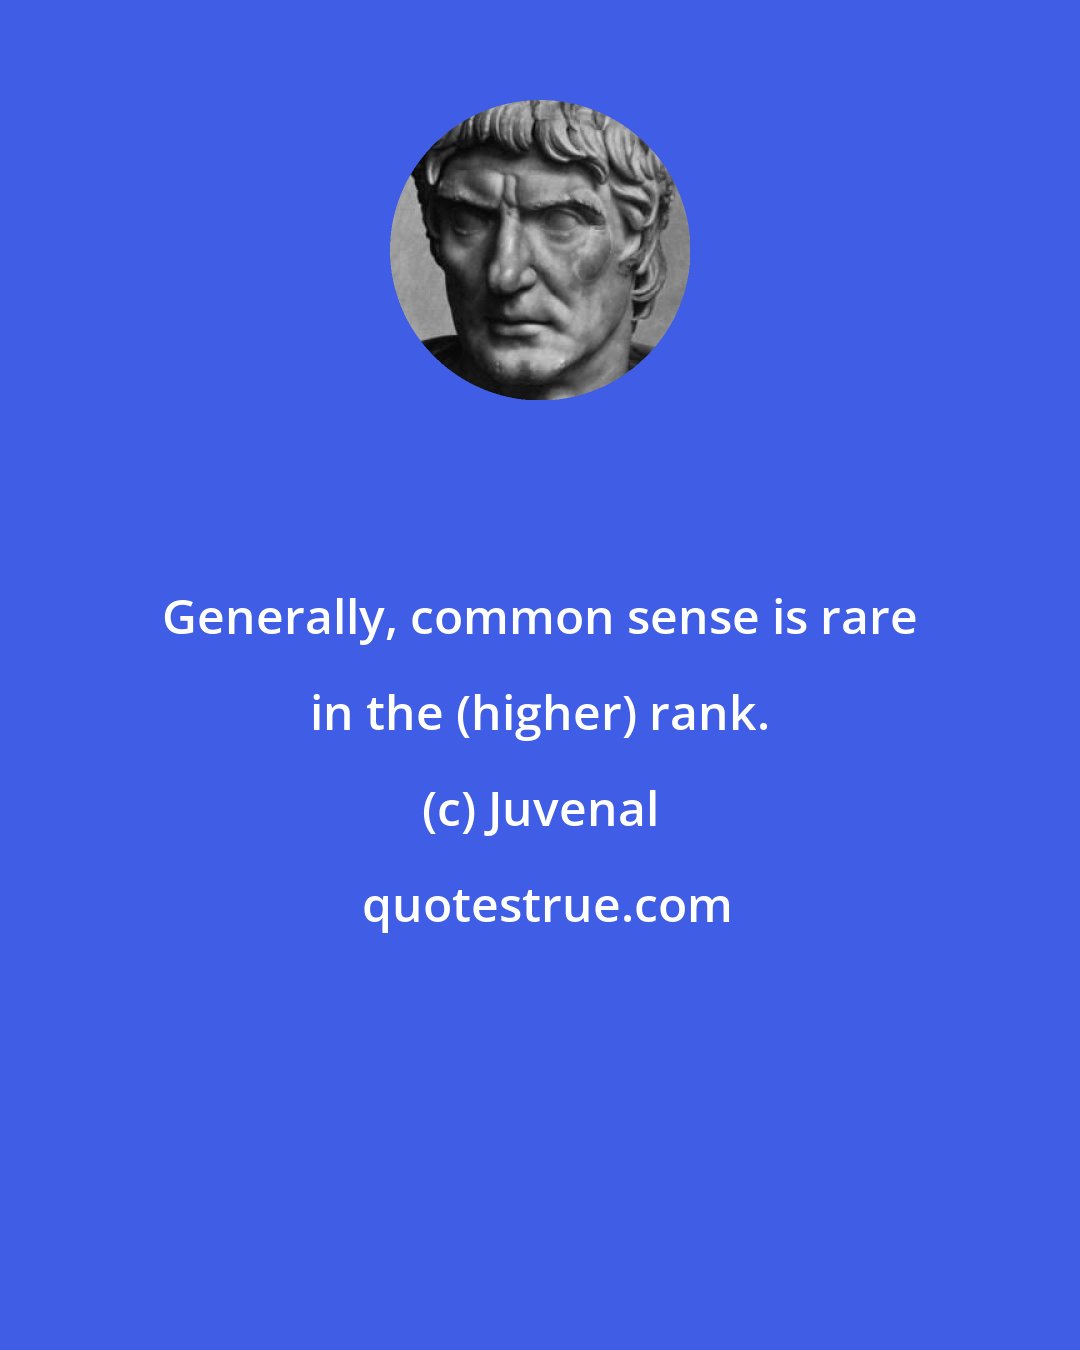 Juvenal: Generally, common sense is rare in the (higher) rank.